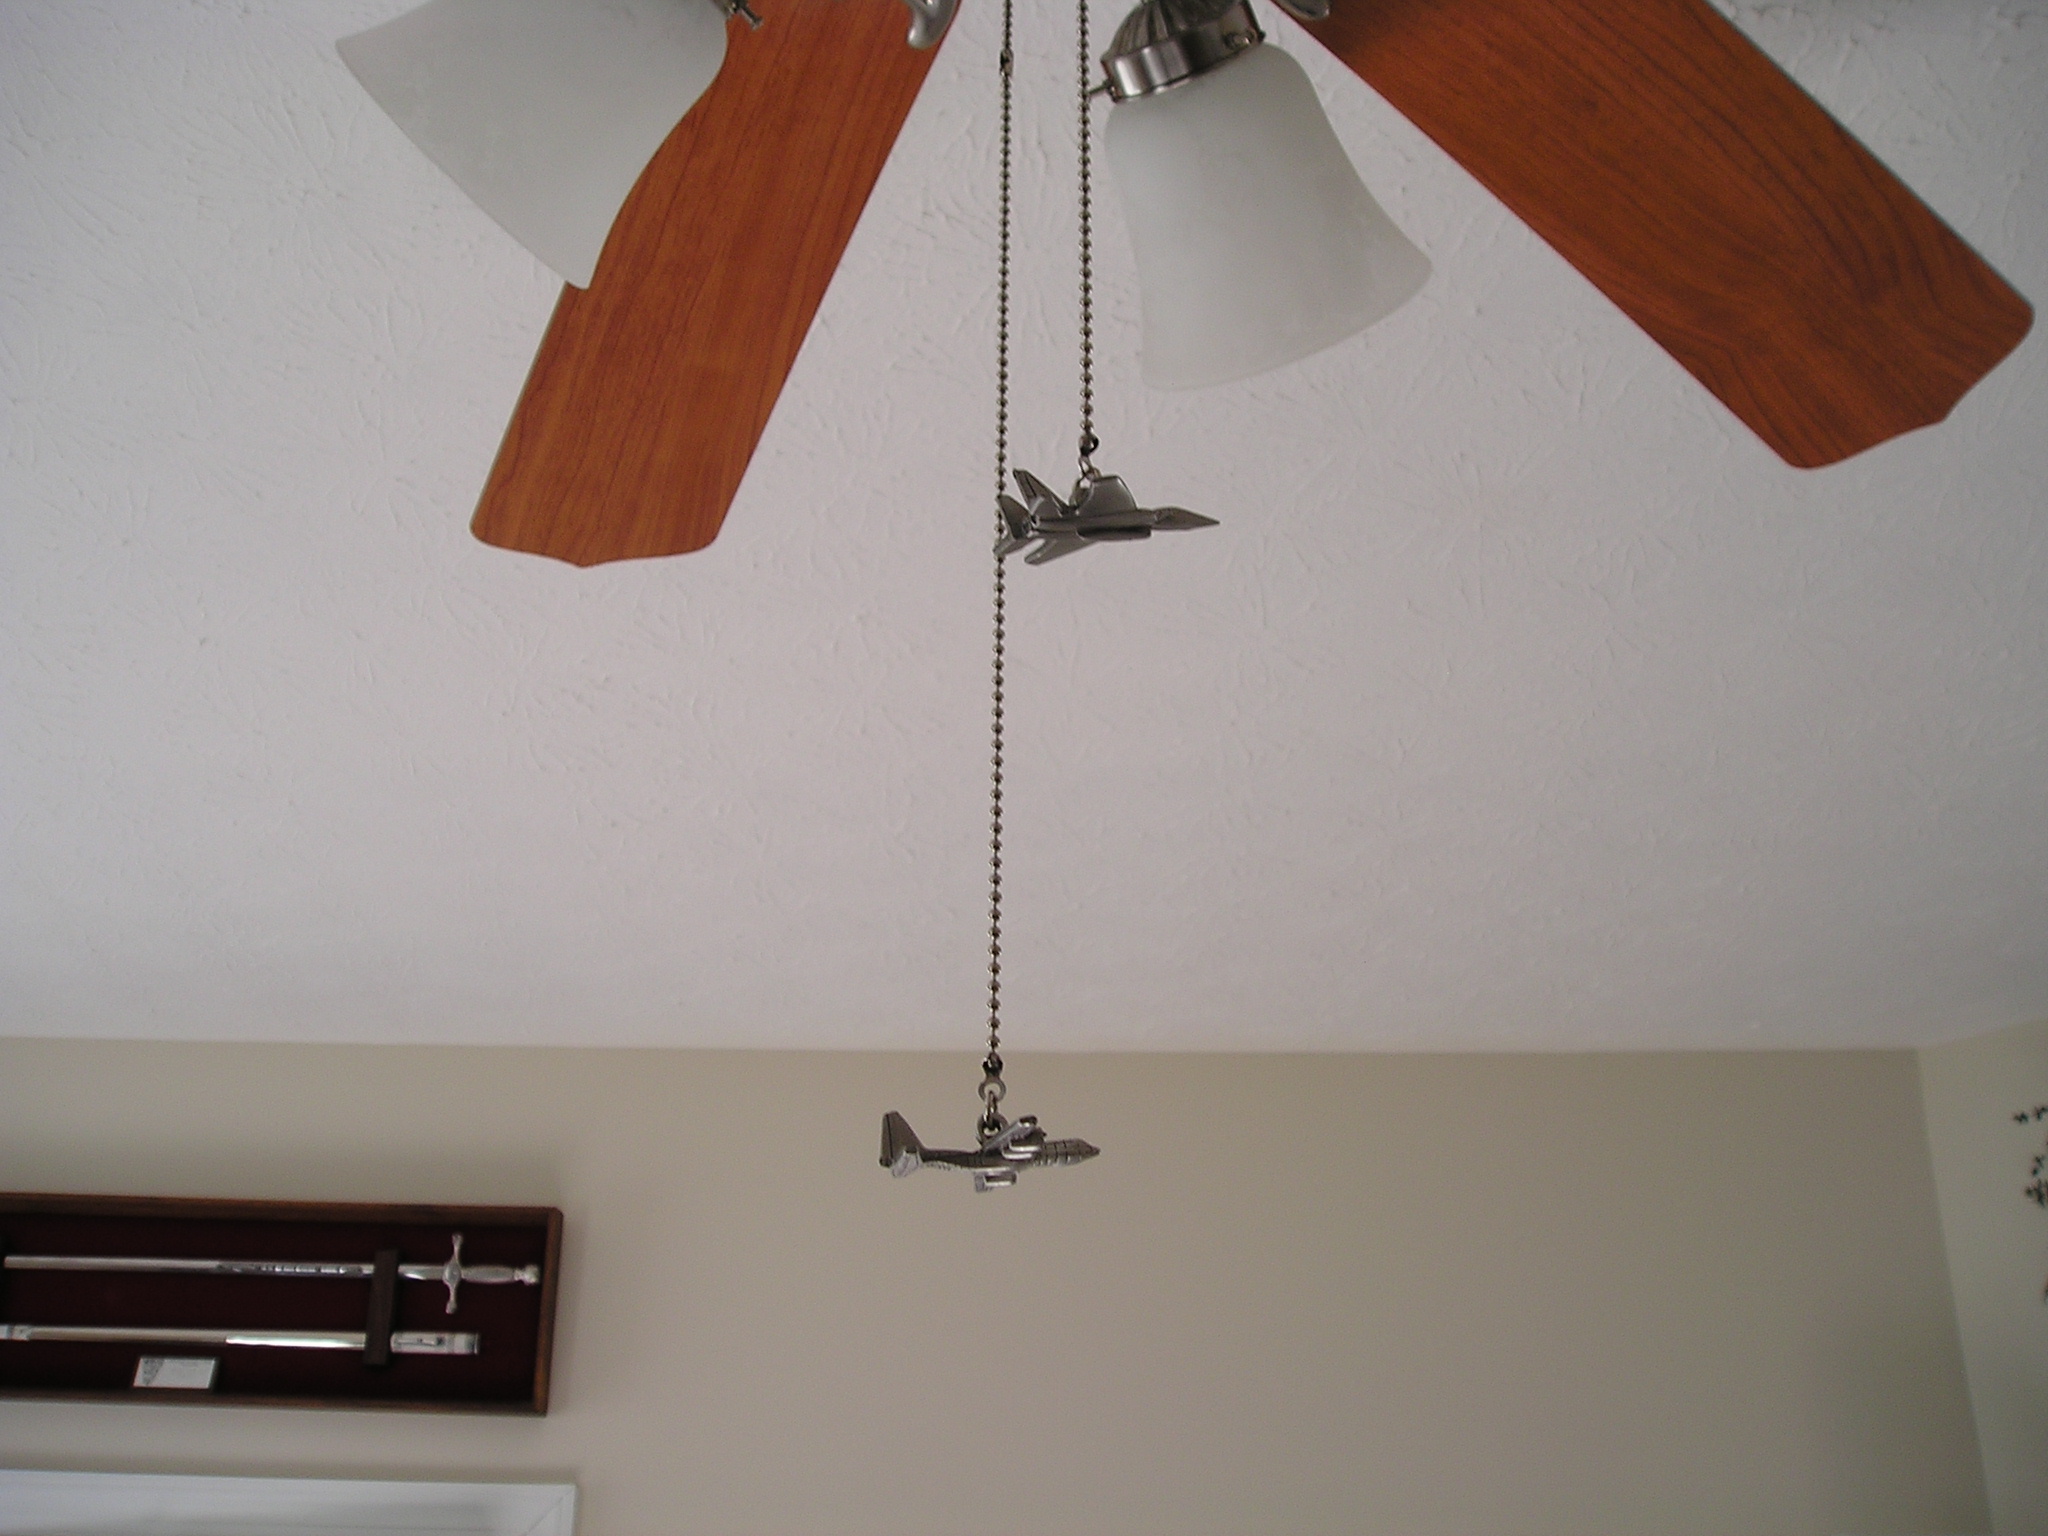 Military Aircraft Ceiling Fan Pulls In 3d Airplane And Helicopter